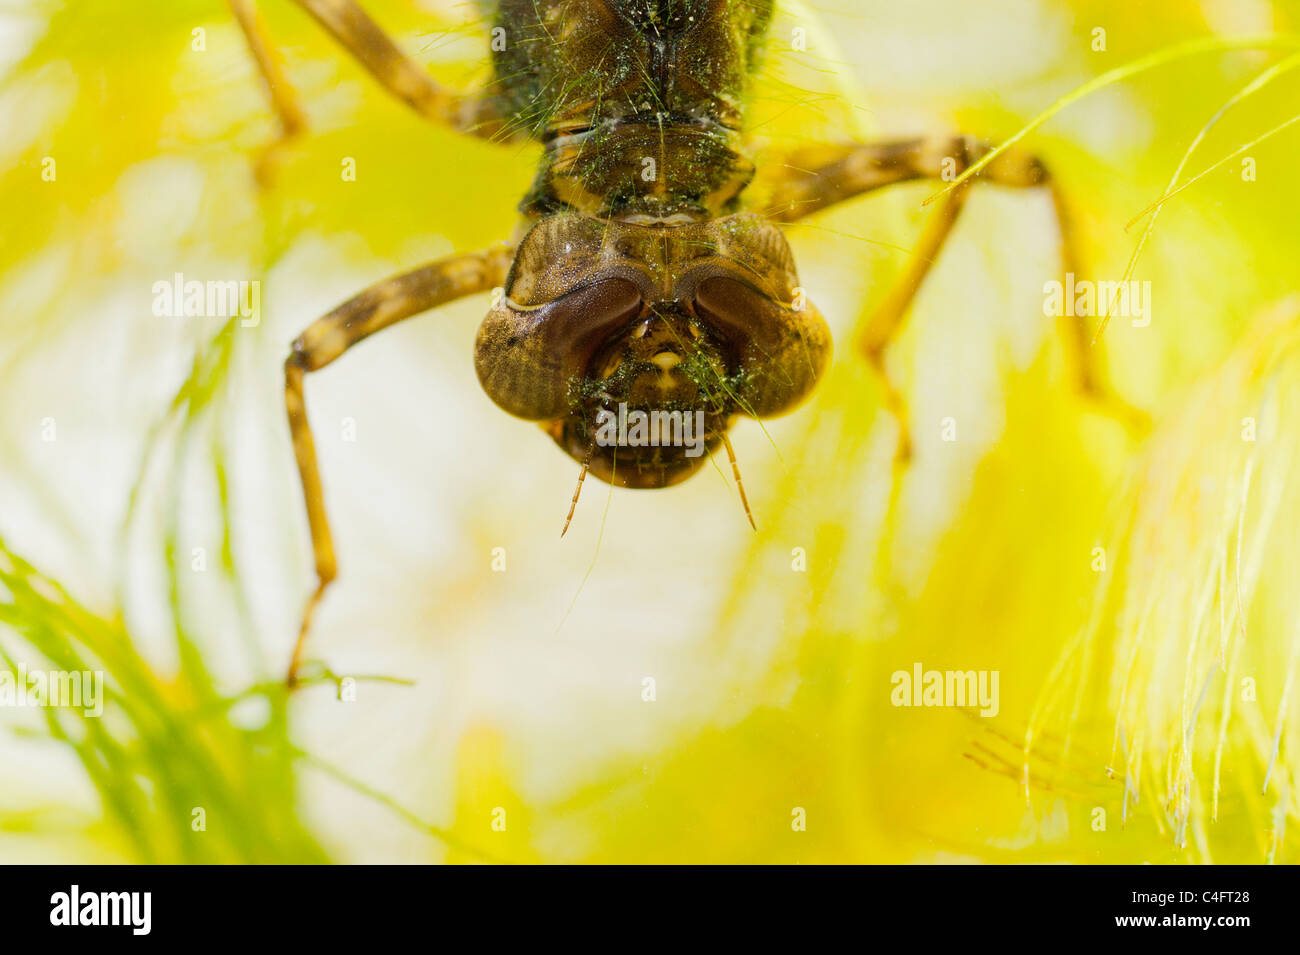 A Dragonfly nymph ( larvae ) swimming in an aquarium in the Uk Stock Photo